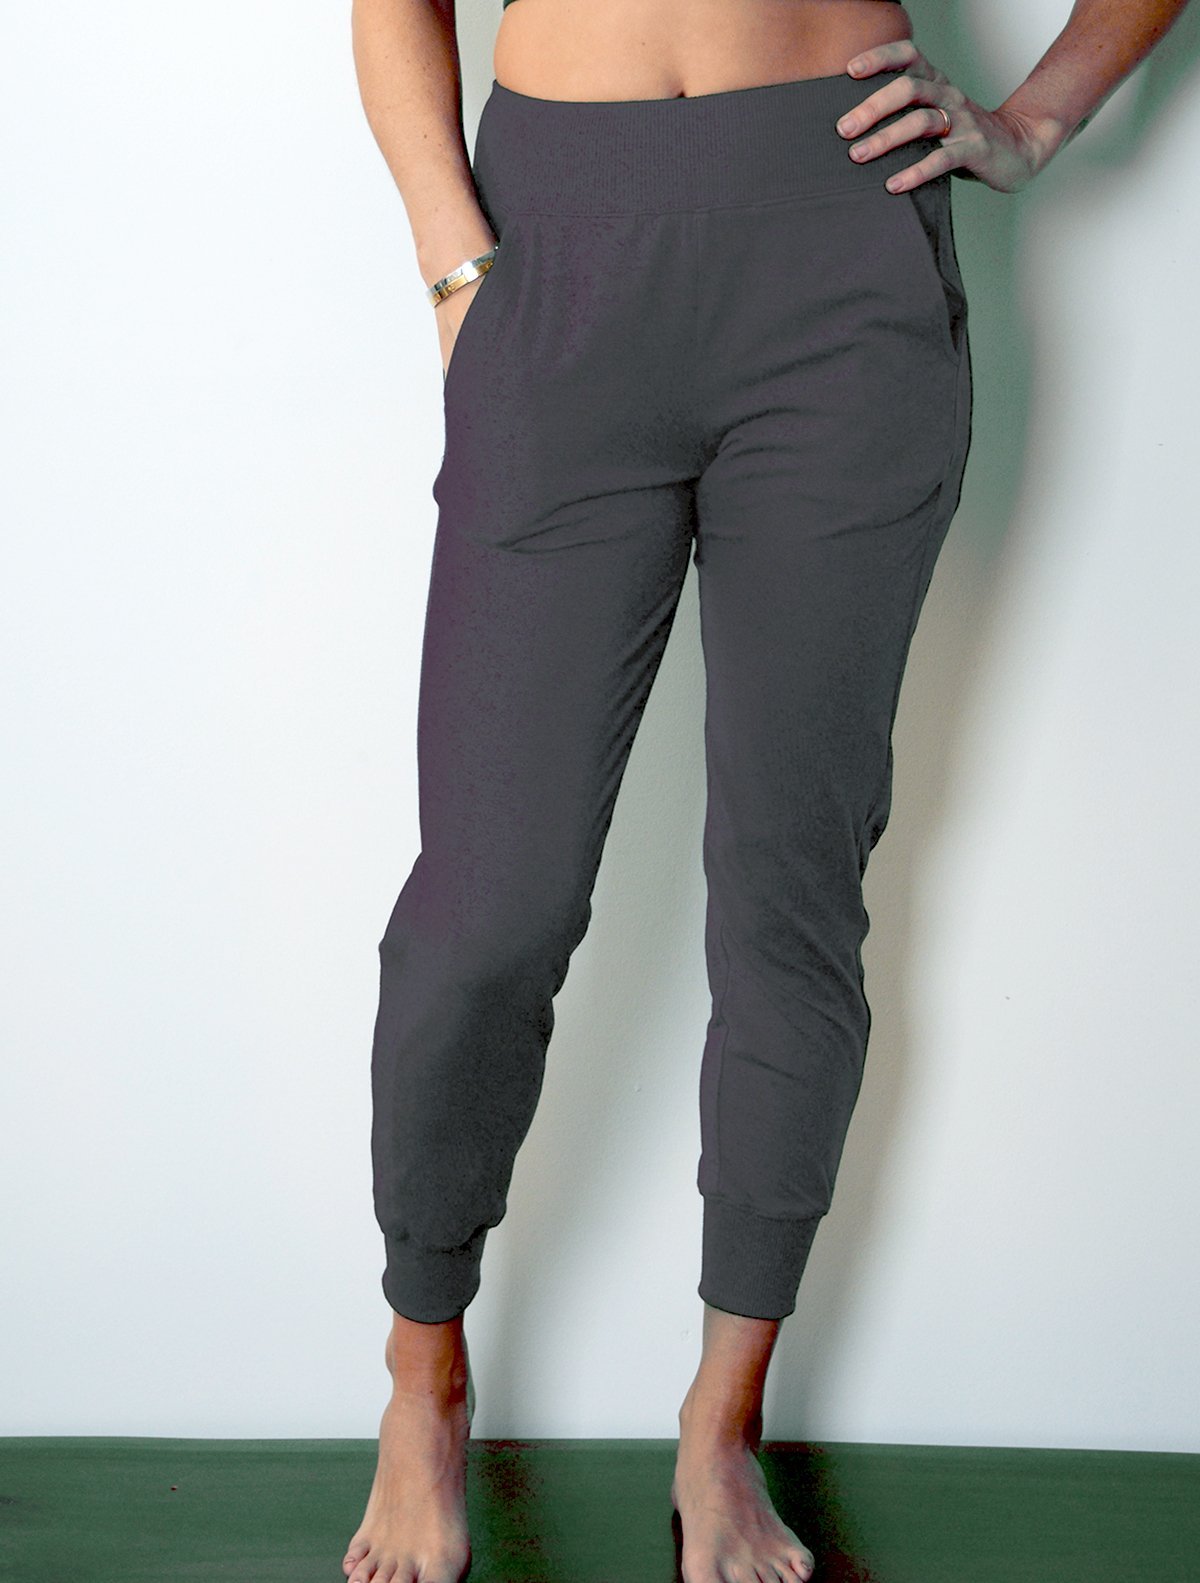 front view of model wearing simulacra's grey women's cropped joggers with pockets version 2.0 